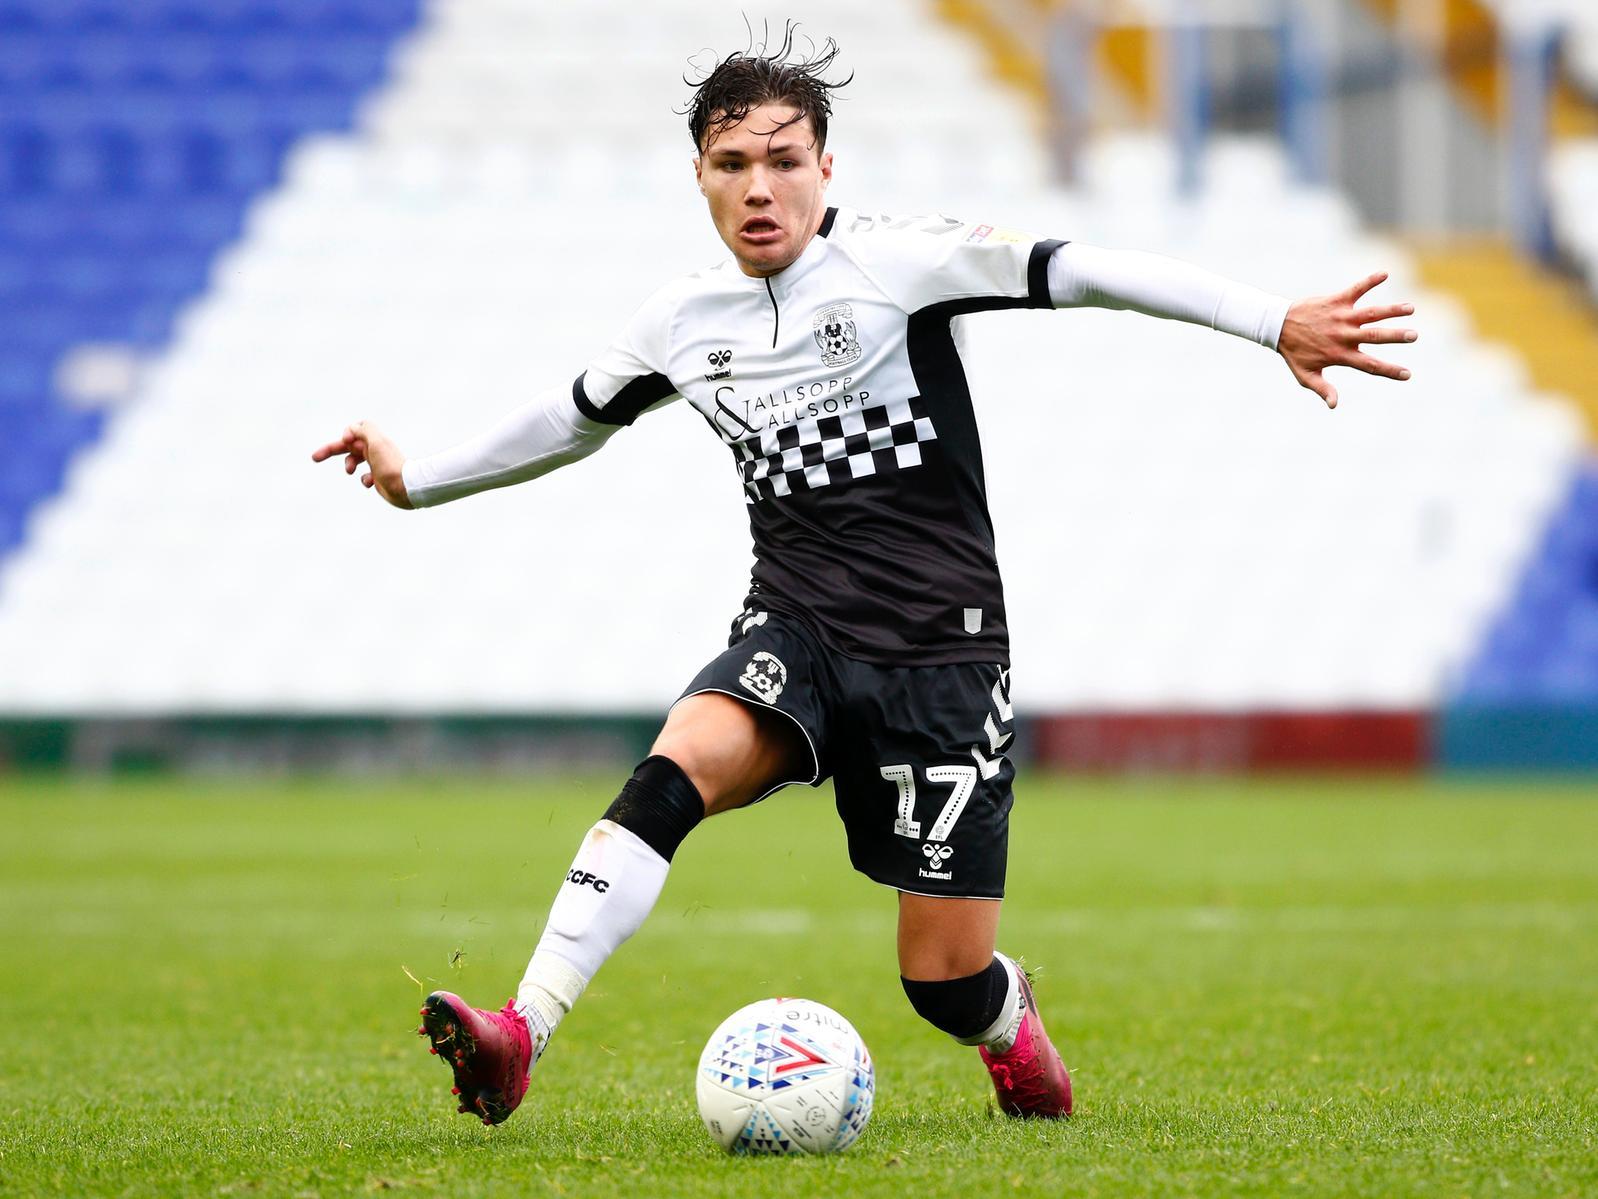 Aston Villa's Callum O'Hare, on loan at Coventry, has hinted he wants to stay with the Sky Blues for the rest of the season. (Birmingham Mail)